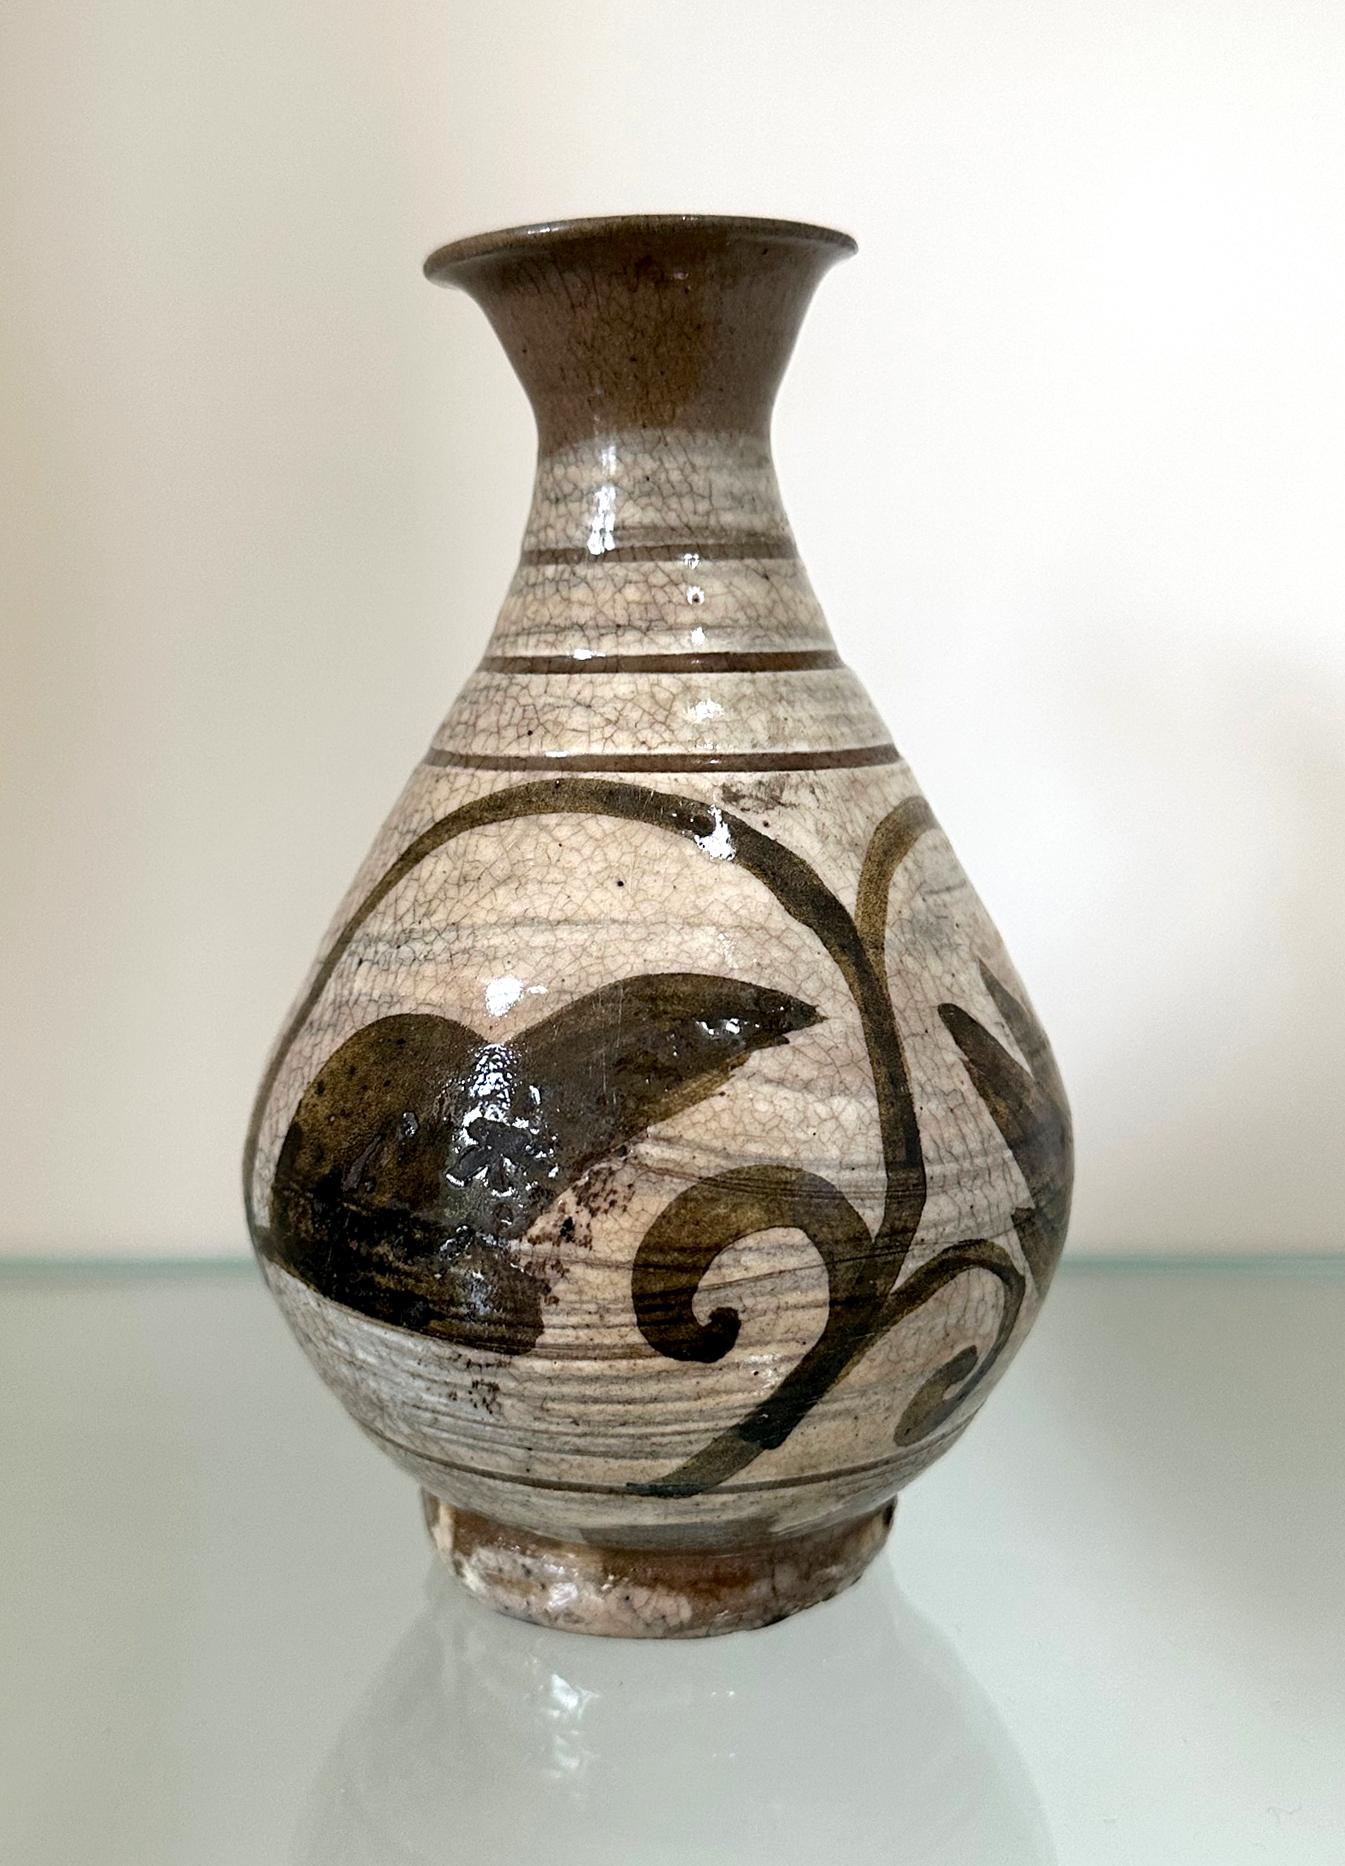 A small antique Korean Buncheong stoneware vase from early Joseon Dynasty circa 16th century. The vase is of a classic pear form with a waisted neck, a flared mouth and a ringed base. It is slightly irregular in shape, typical of the stoneware from